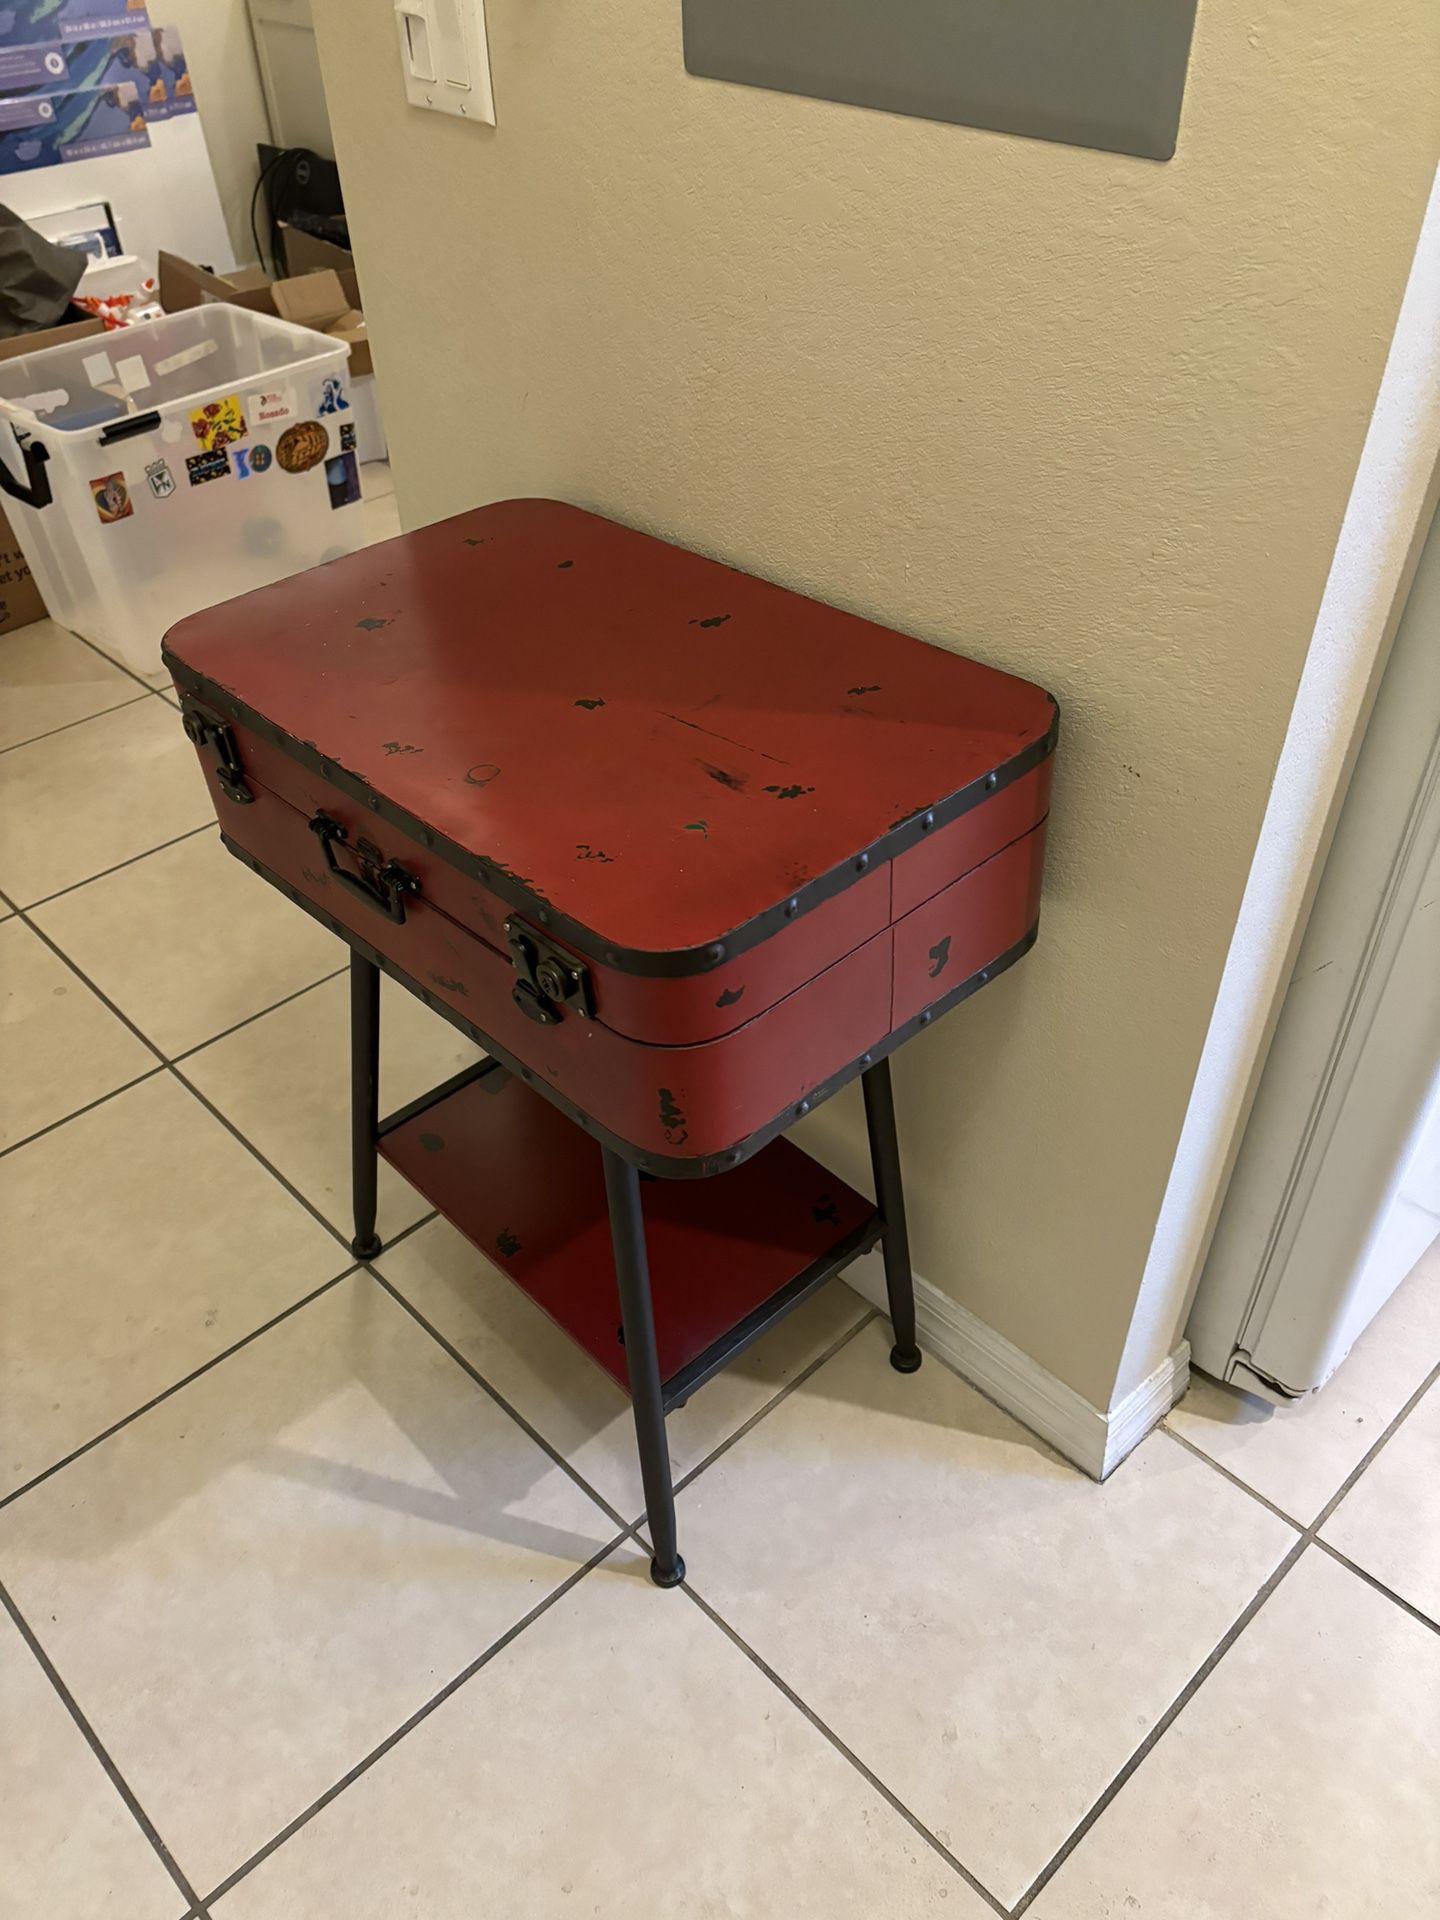 Red “suit case” table 